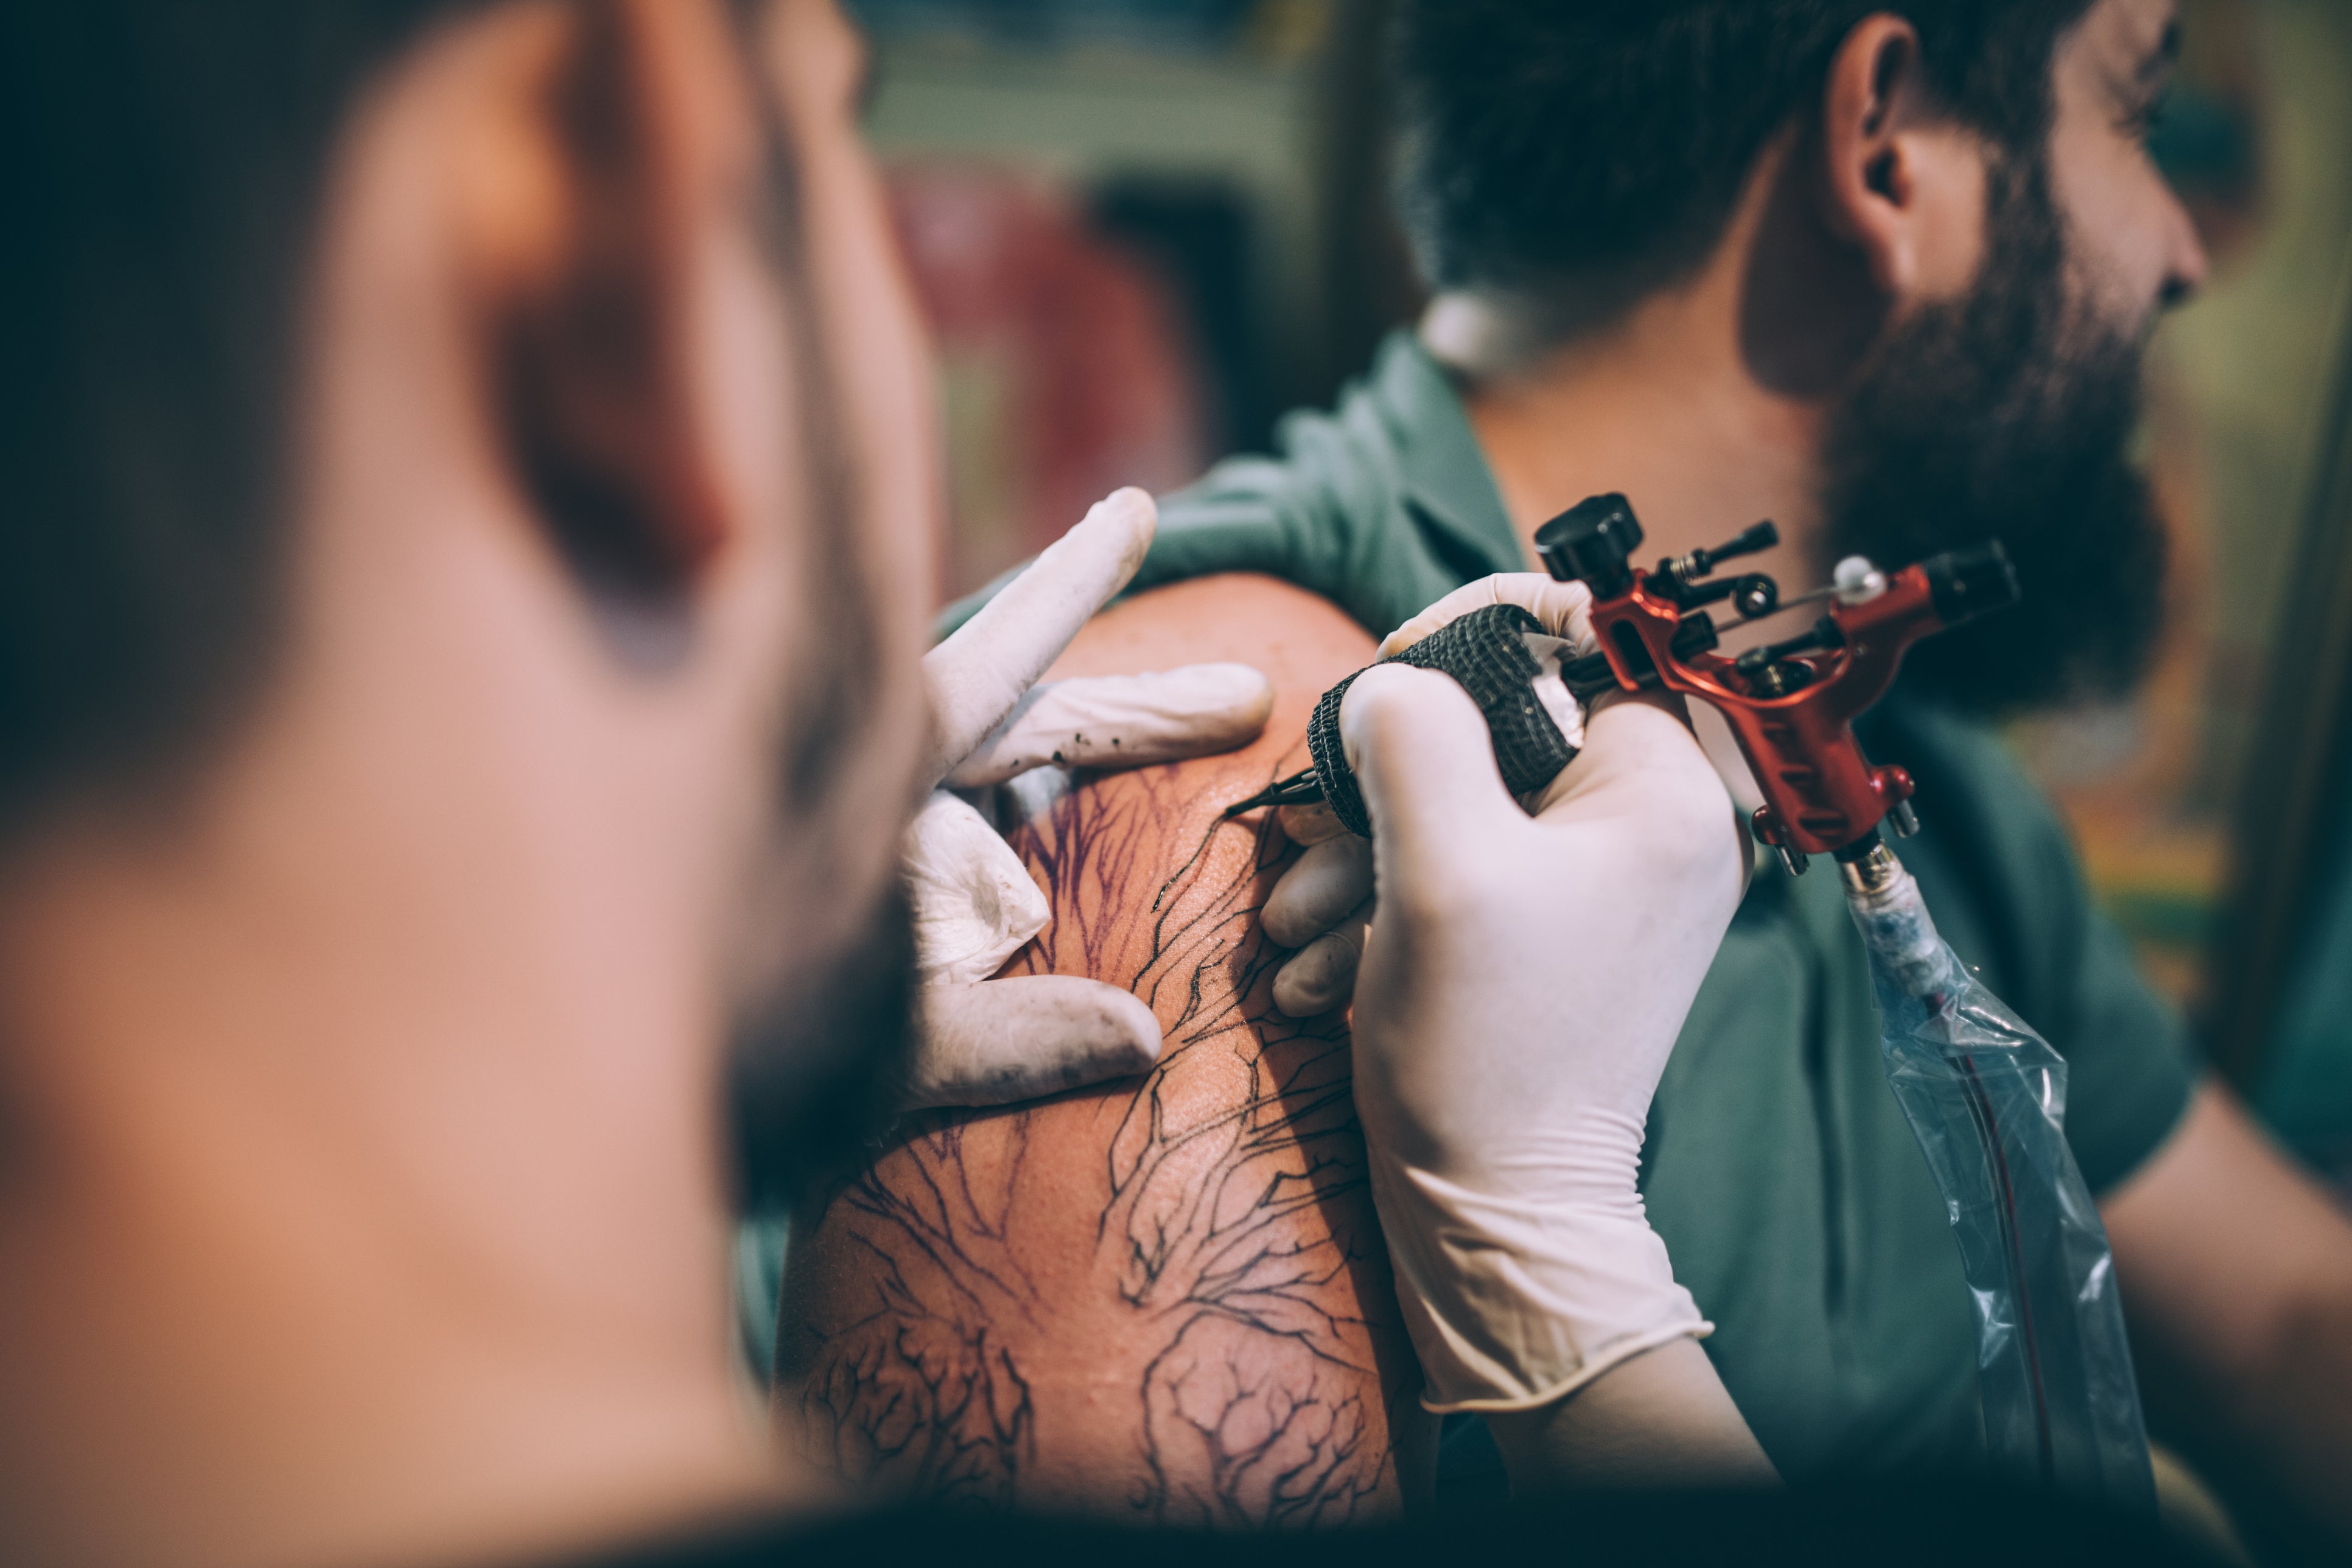 From Design to Aftercare: What Makes a Good Tattoo? — Joby Dorr